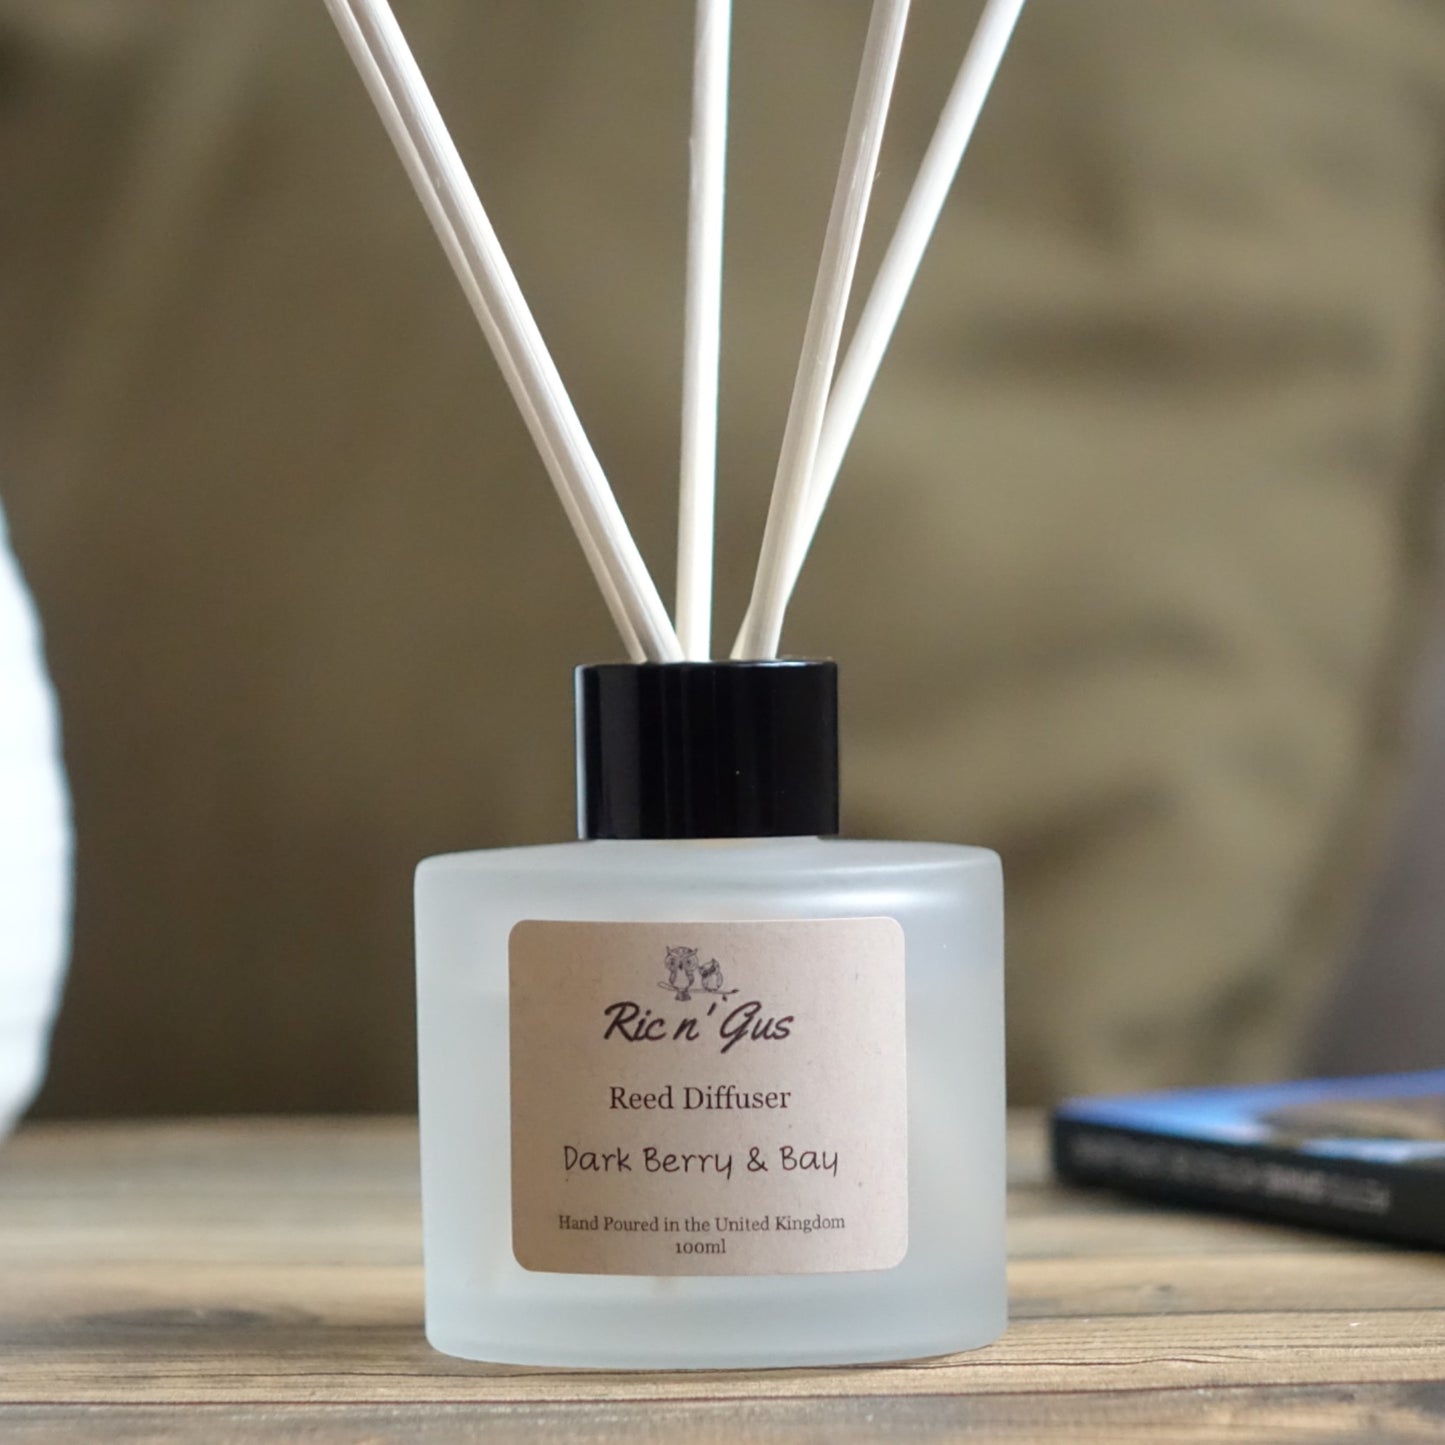 luxury blackberry and bay reed diffuser ric n'gus candles